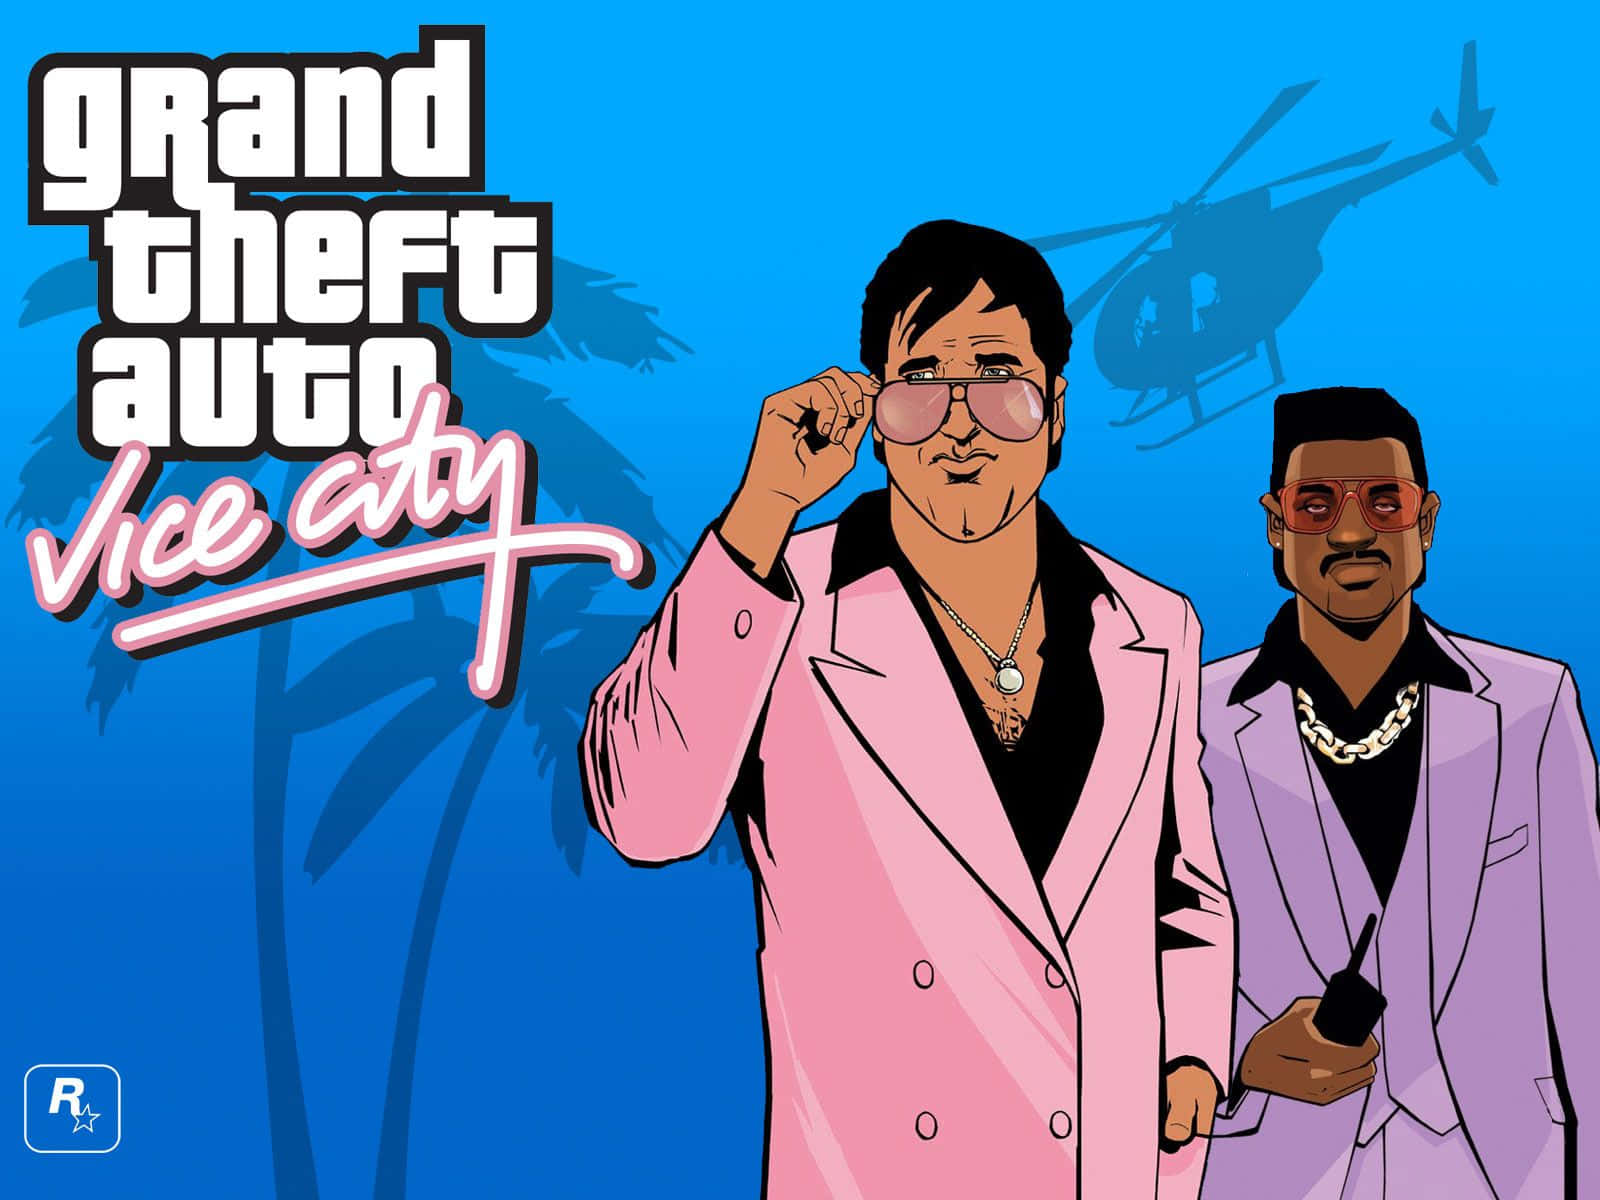 Play Grand Theft Auto: Vice City and explore the colorful neighborhood of Vice City Wallpaper